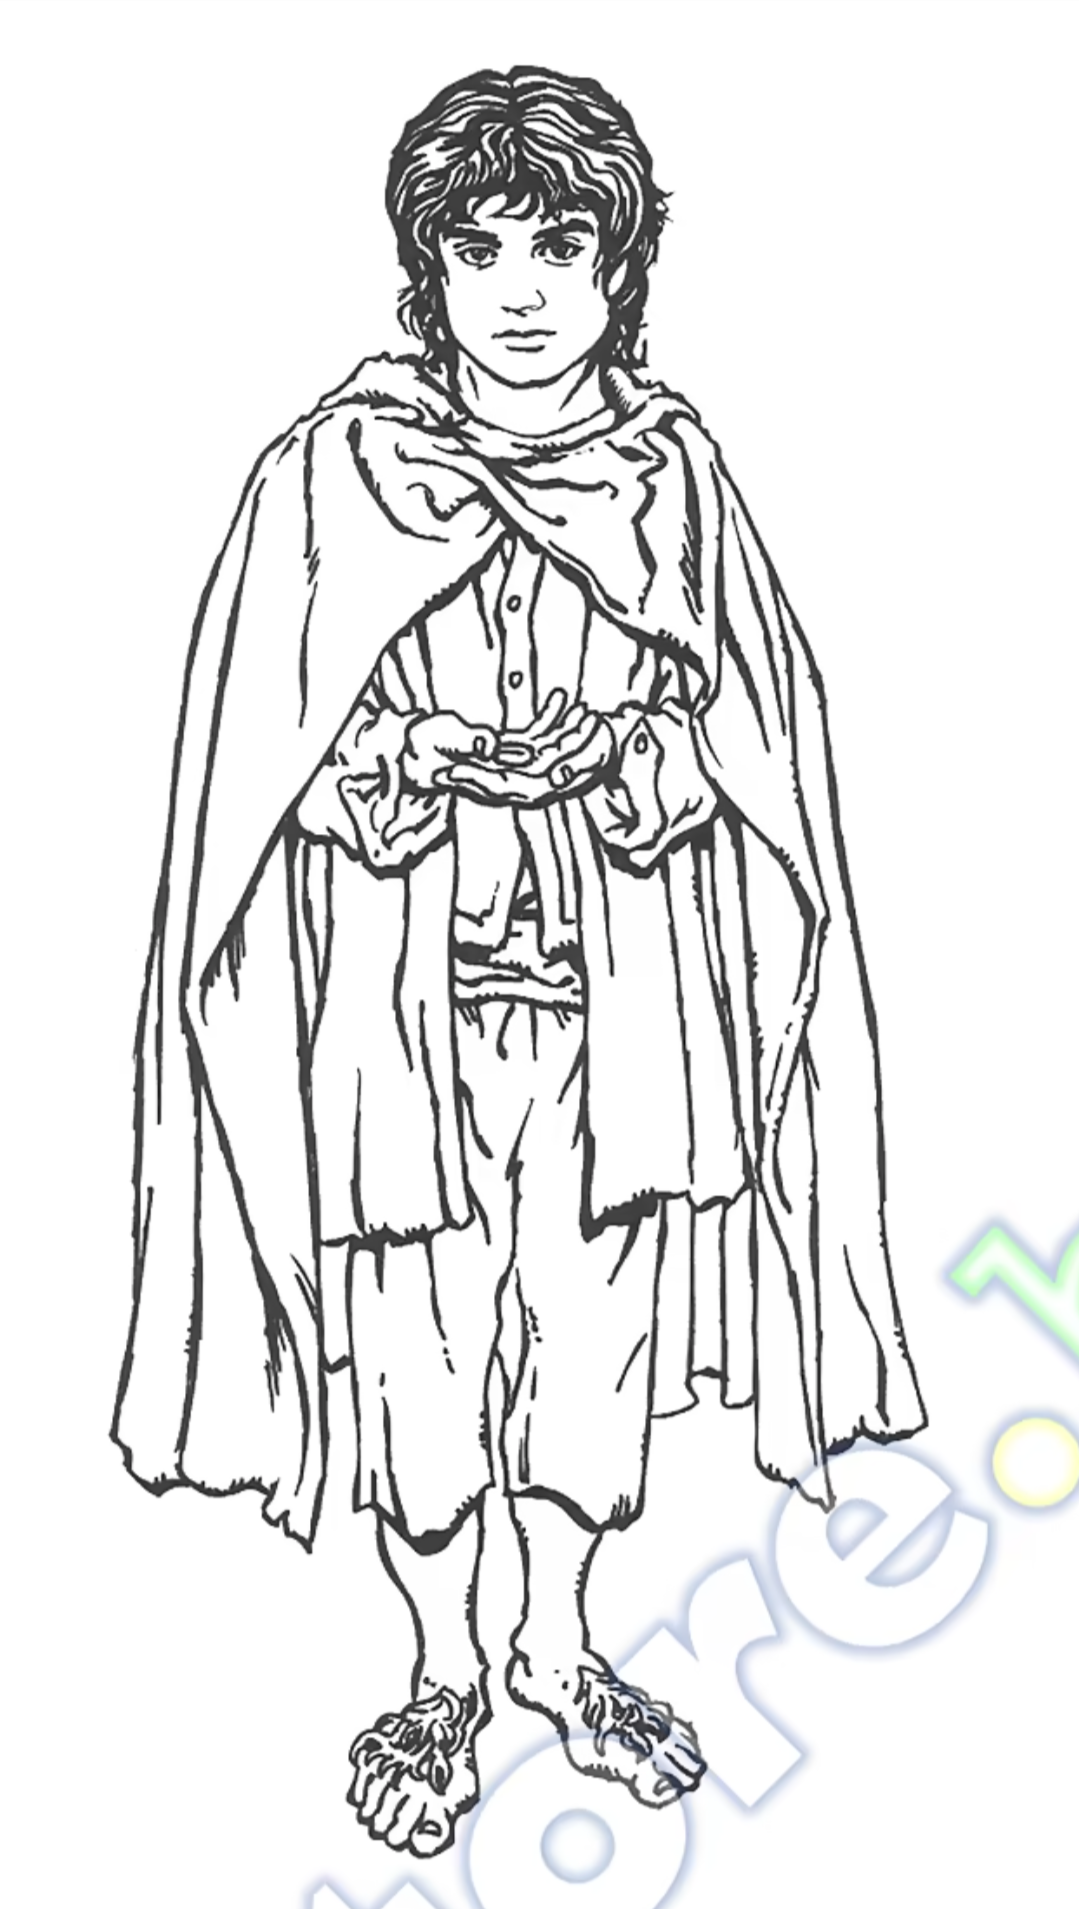 Frodo lotr coloring page lotr lord of the rings coloring pages